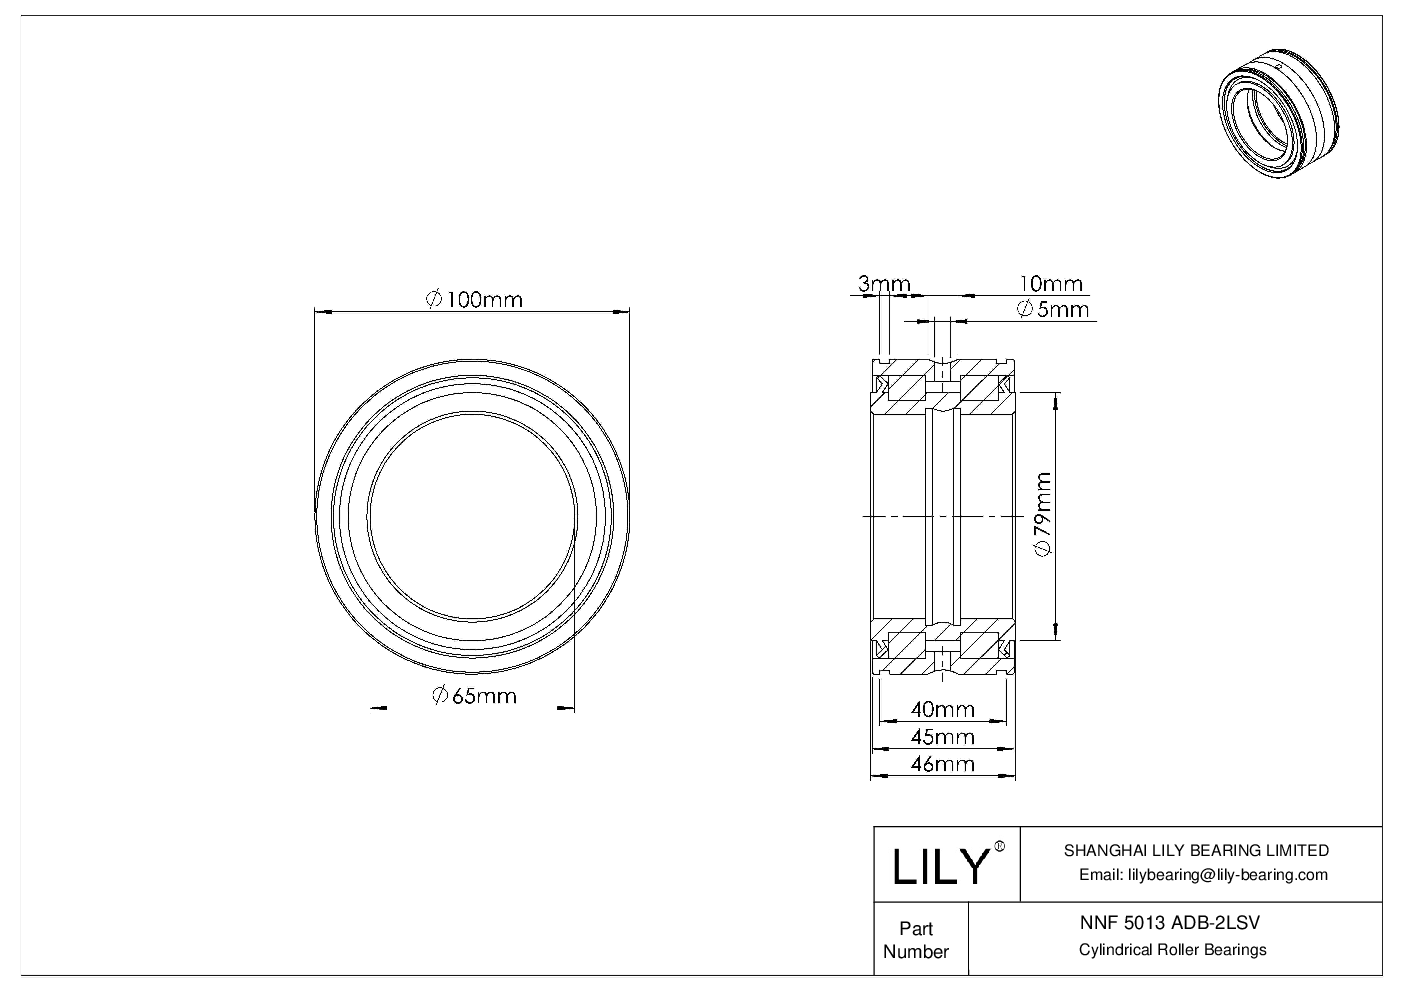 NNF 5013 ADB-2LSV Double Row Full Complement Cylindrical Roller Bearings cad drawing